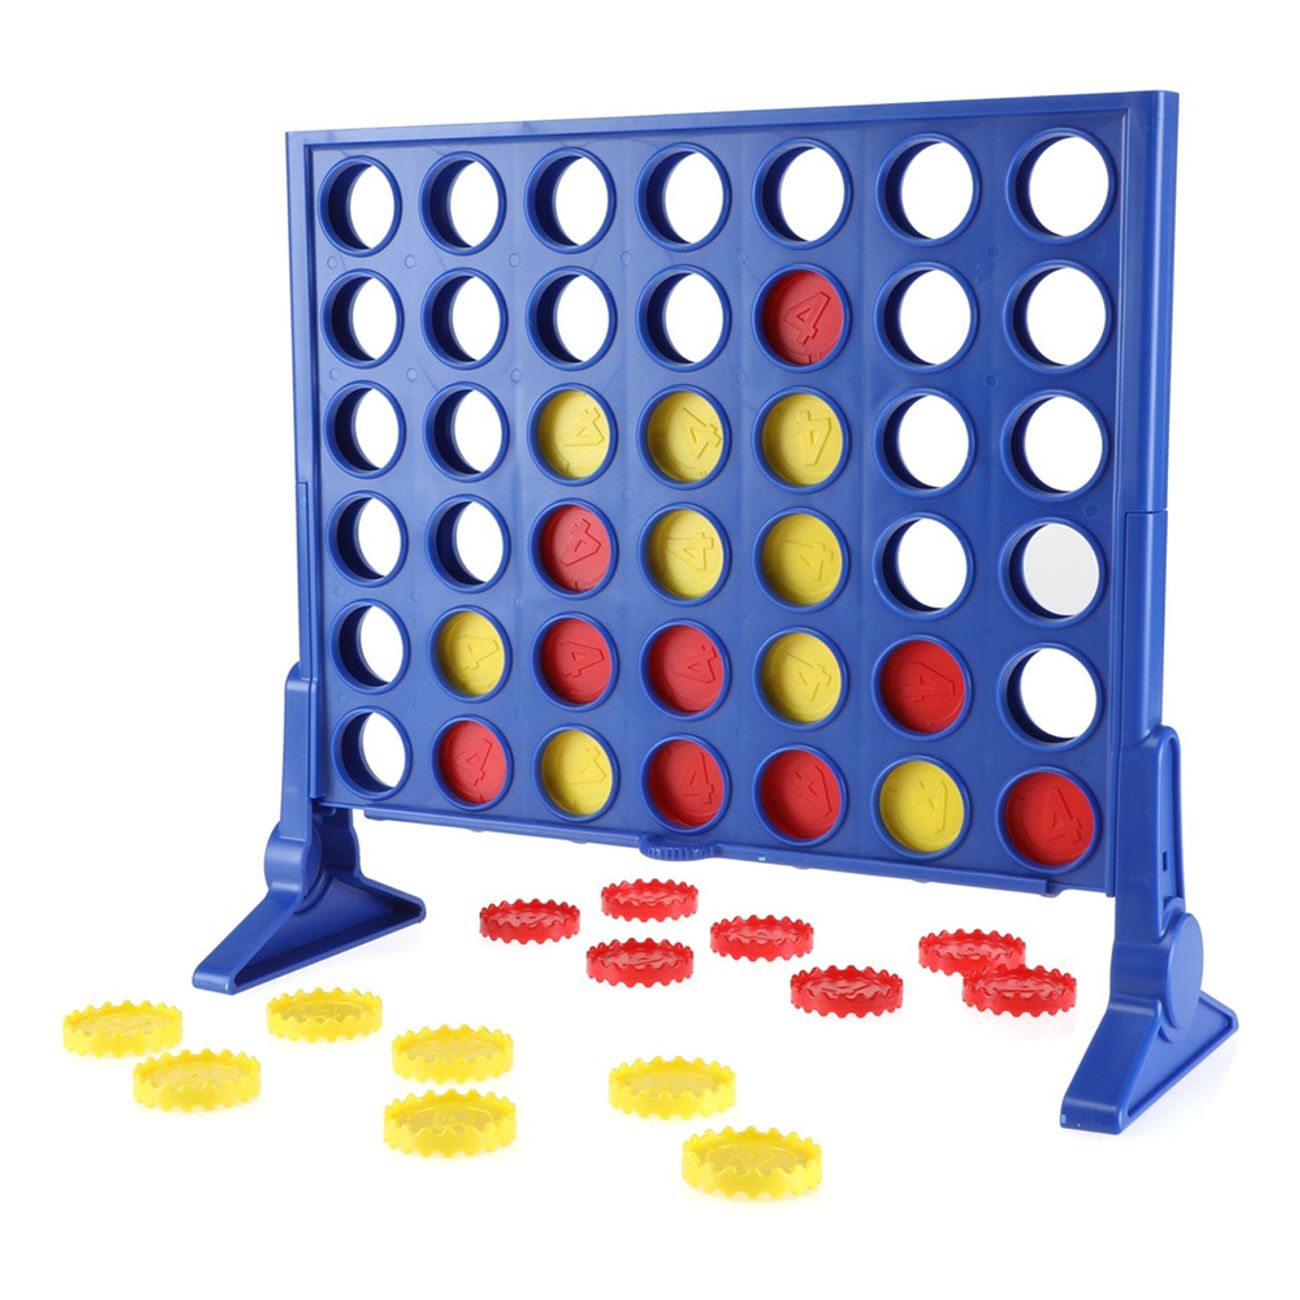 connect-4-spel-1